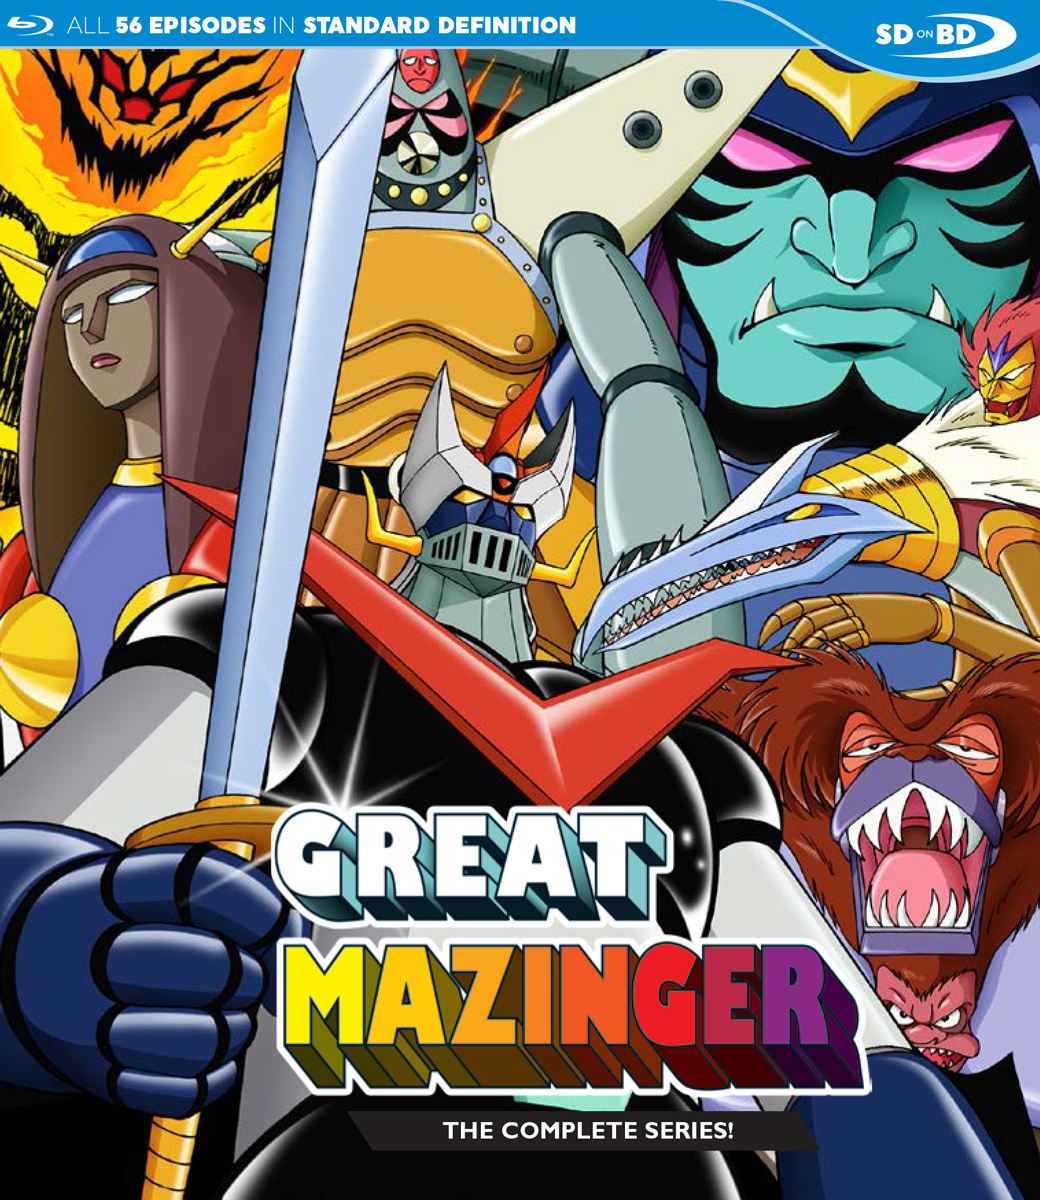 Great Mazinger Blu-ray image count 0